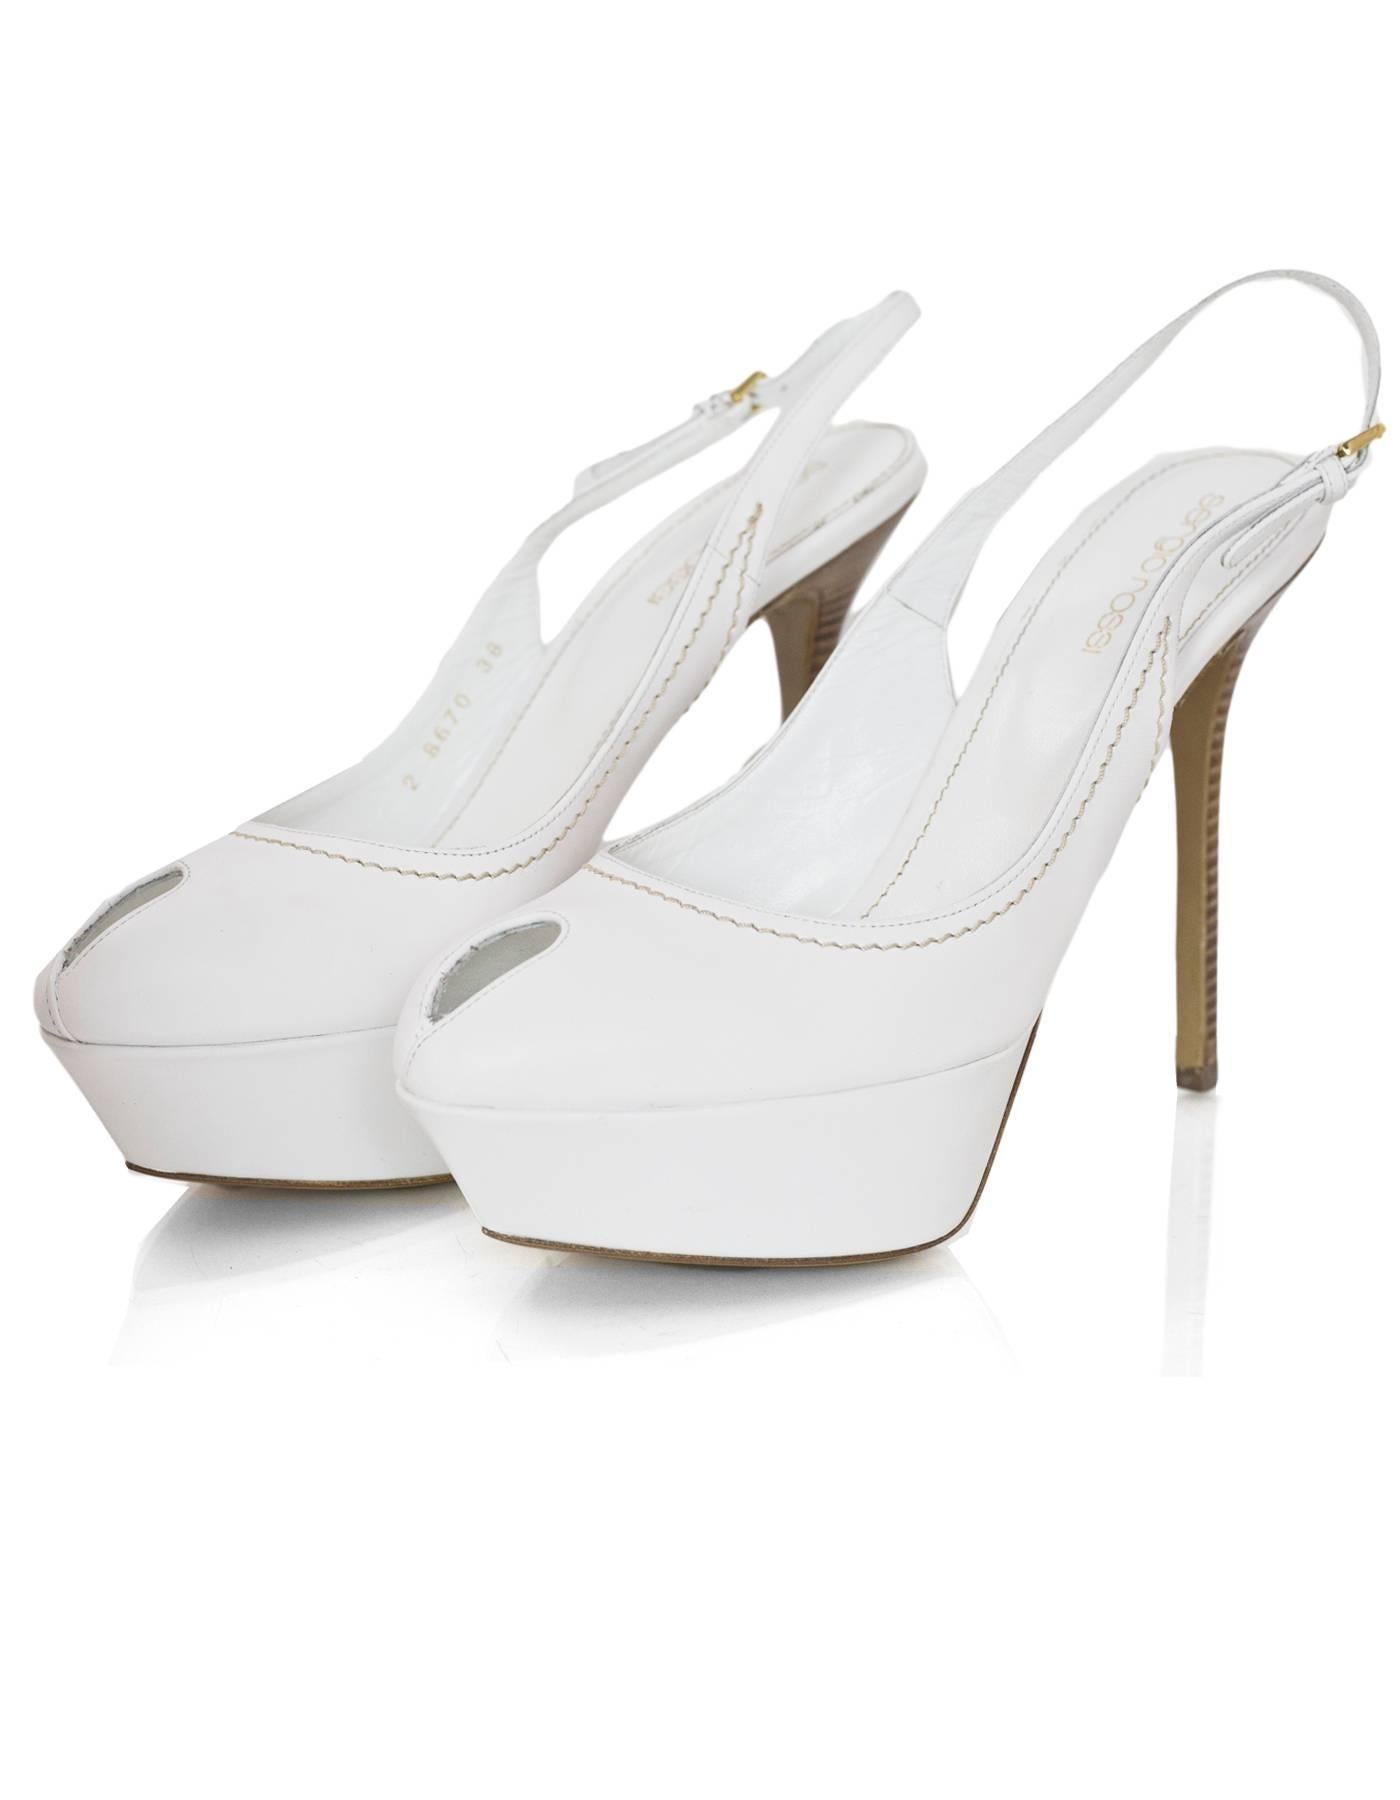 Sergio Rossi White Leather Peep-toe Pumps Sz 38 NIB

Made In: Italy
Color: White
Materials: Leather
Closure/Opening: Slingback
Sole Stamp: Sergio Rossi Vero Cuoio Made in Italy 38
Overall Condition: Excellent pre-owned condition - NIB
Included: